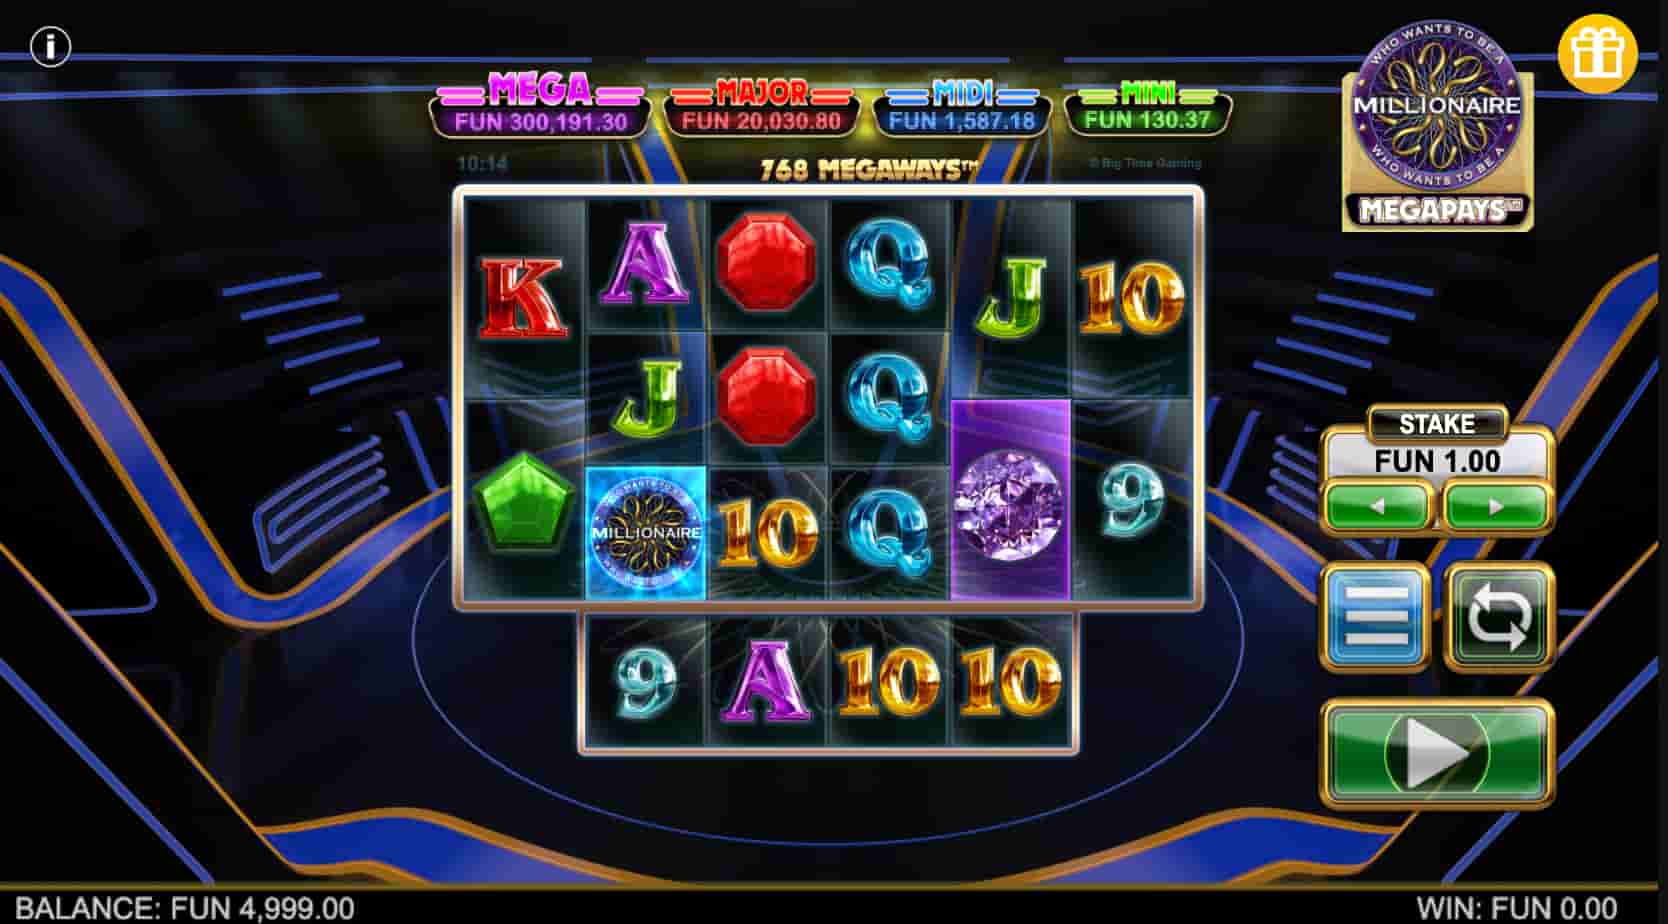 Who Wants to be a Millionaire Megapays screenshot 1